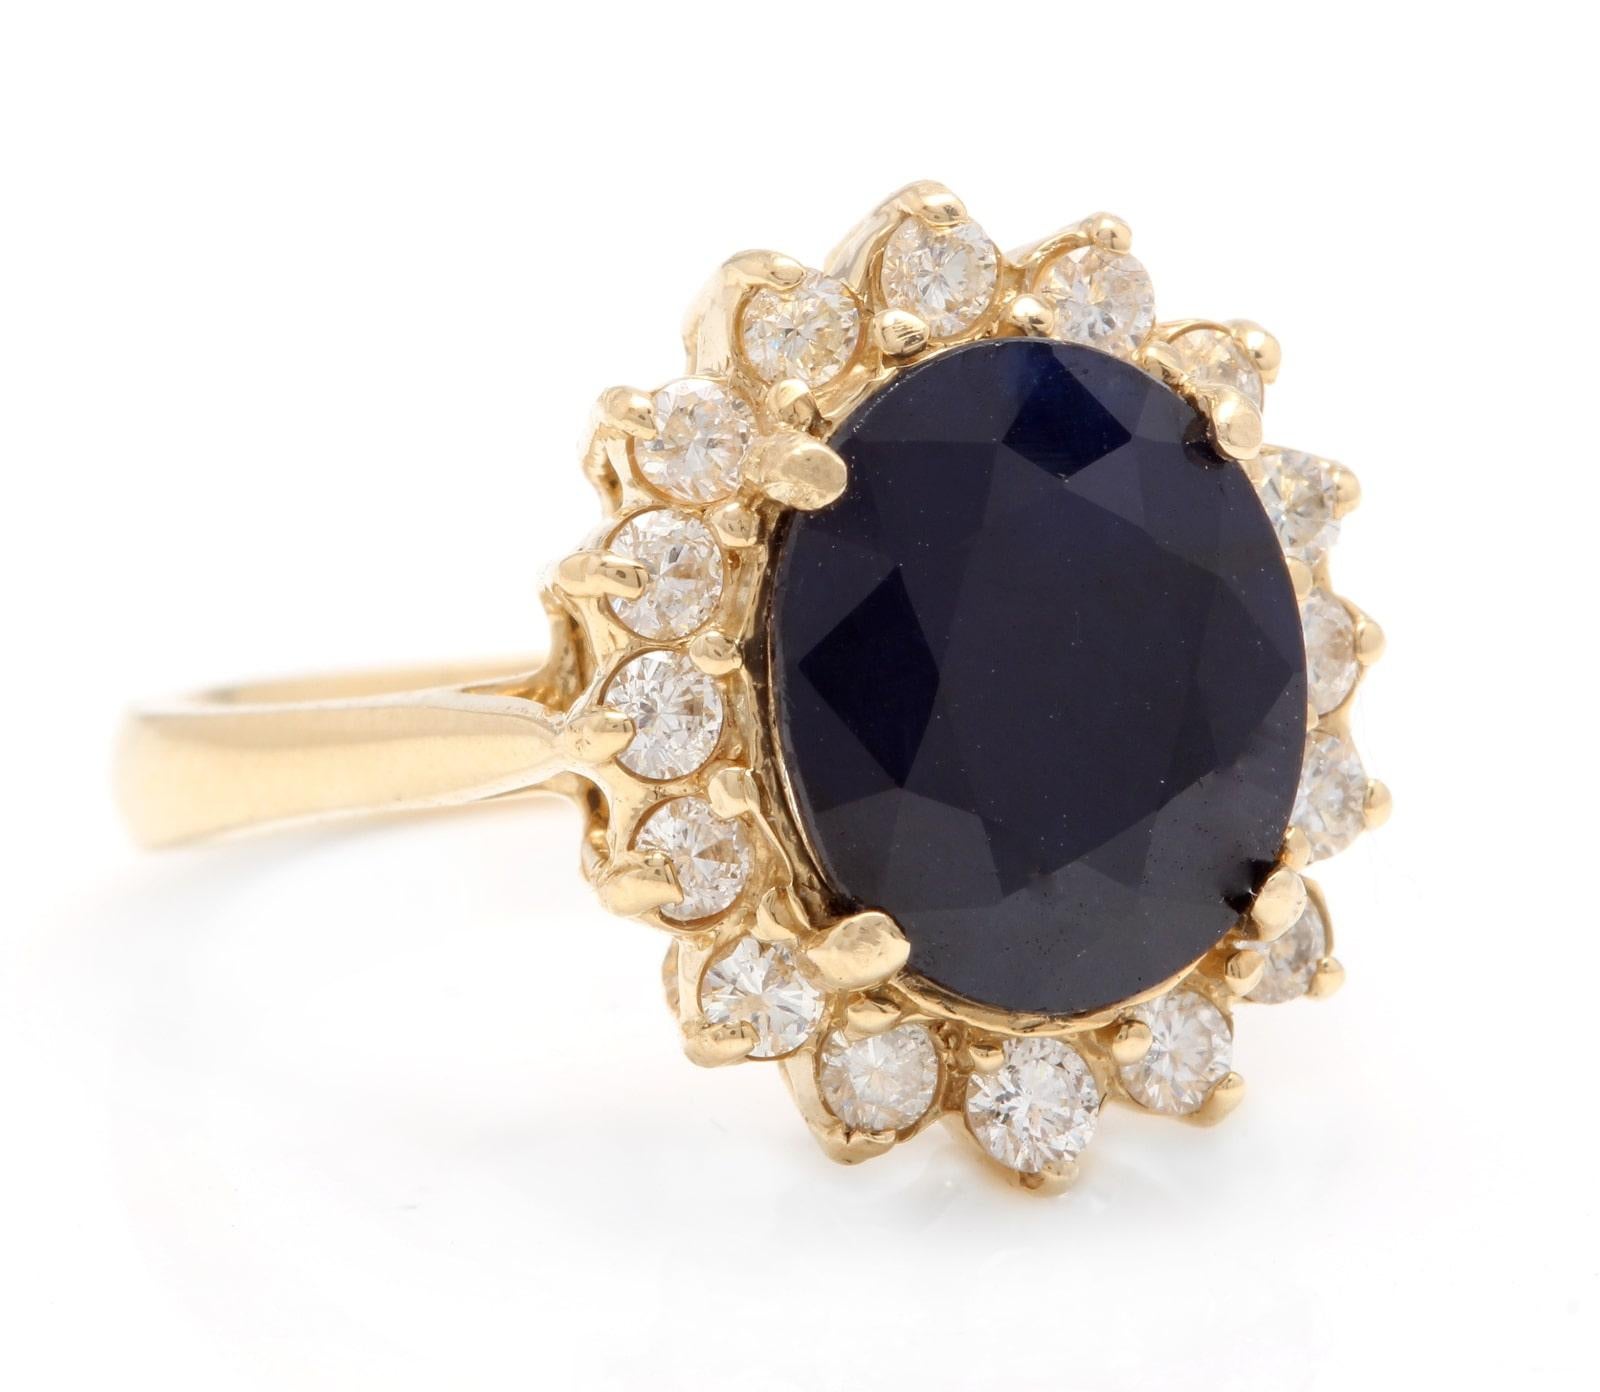 4.80 Carats Impressive Natural Sapphire and Natural Diamond 14K Yellow Gold Ring

Stamped: 14K

Suggested Replacement Value: $5,600.00

Total Sapphire Weight is: Approx. 4.20 Carats

Sapphire Treatment: Diffusion

Sapphire Measures: Approx. 11.00 x